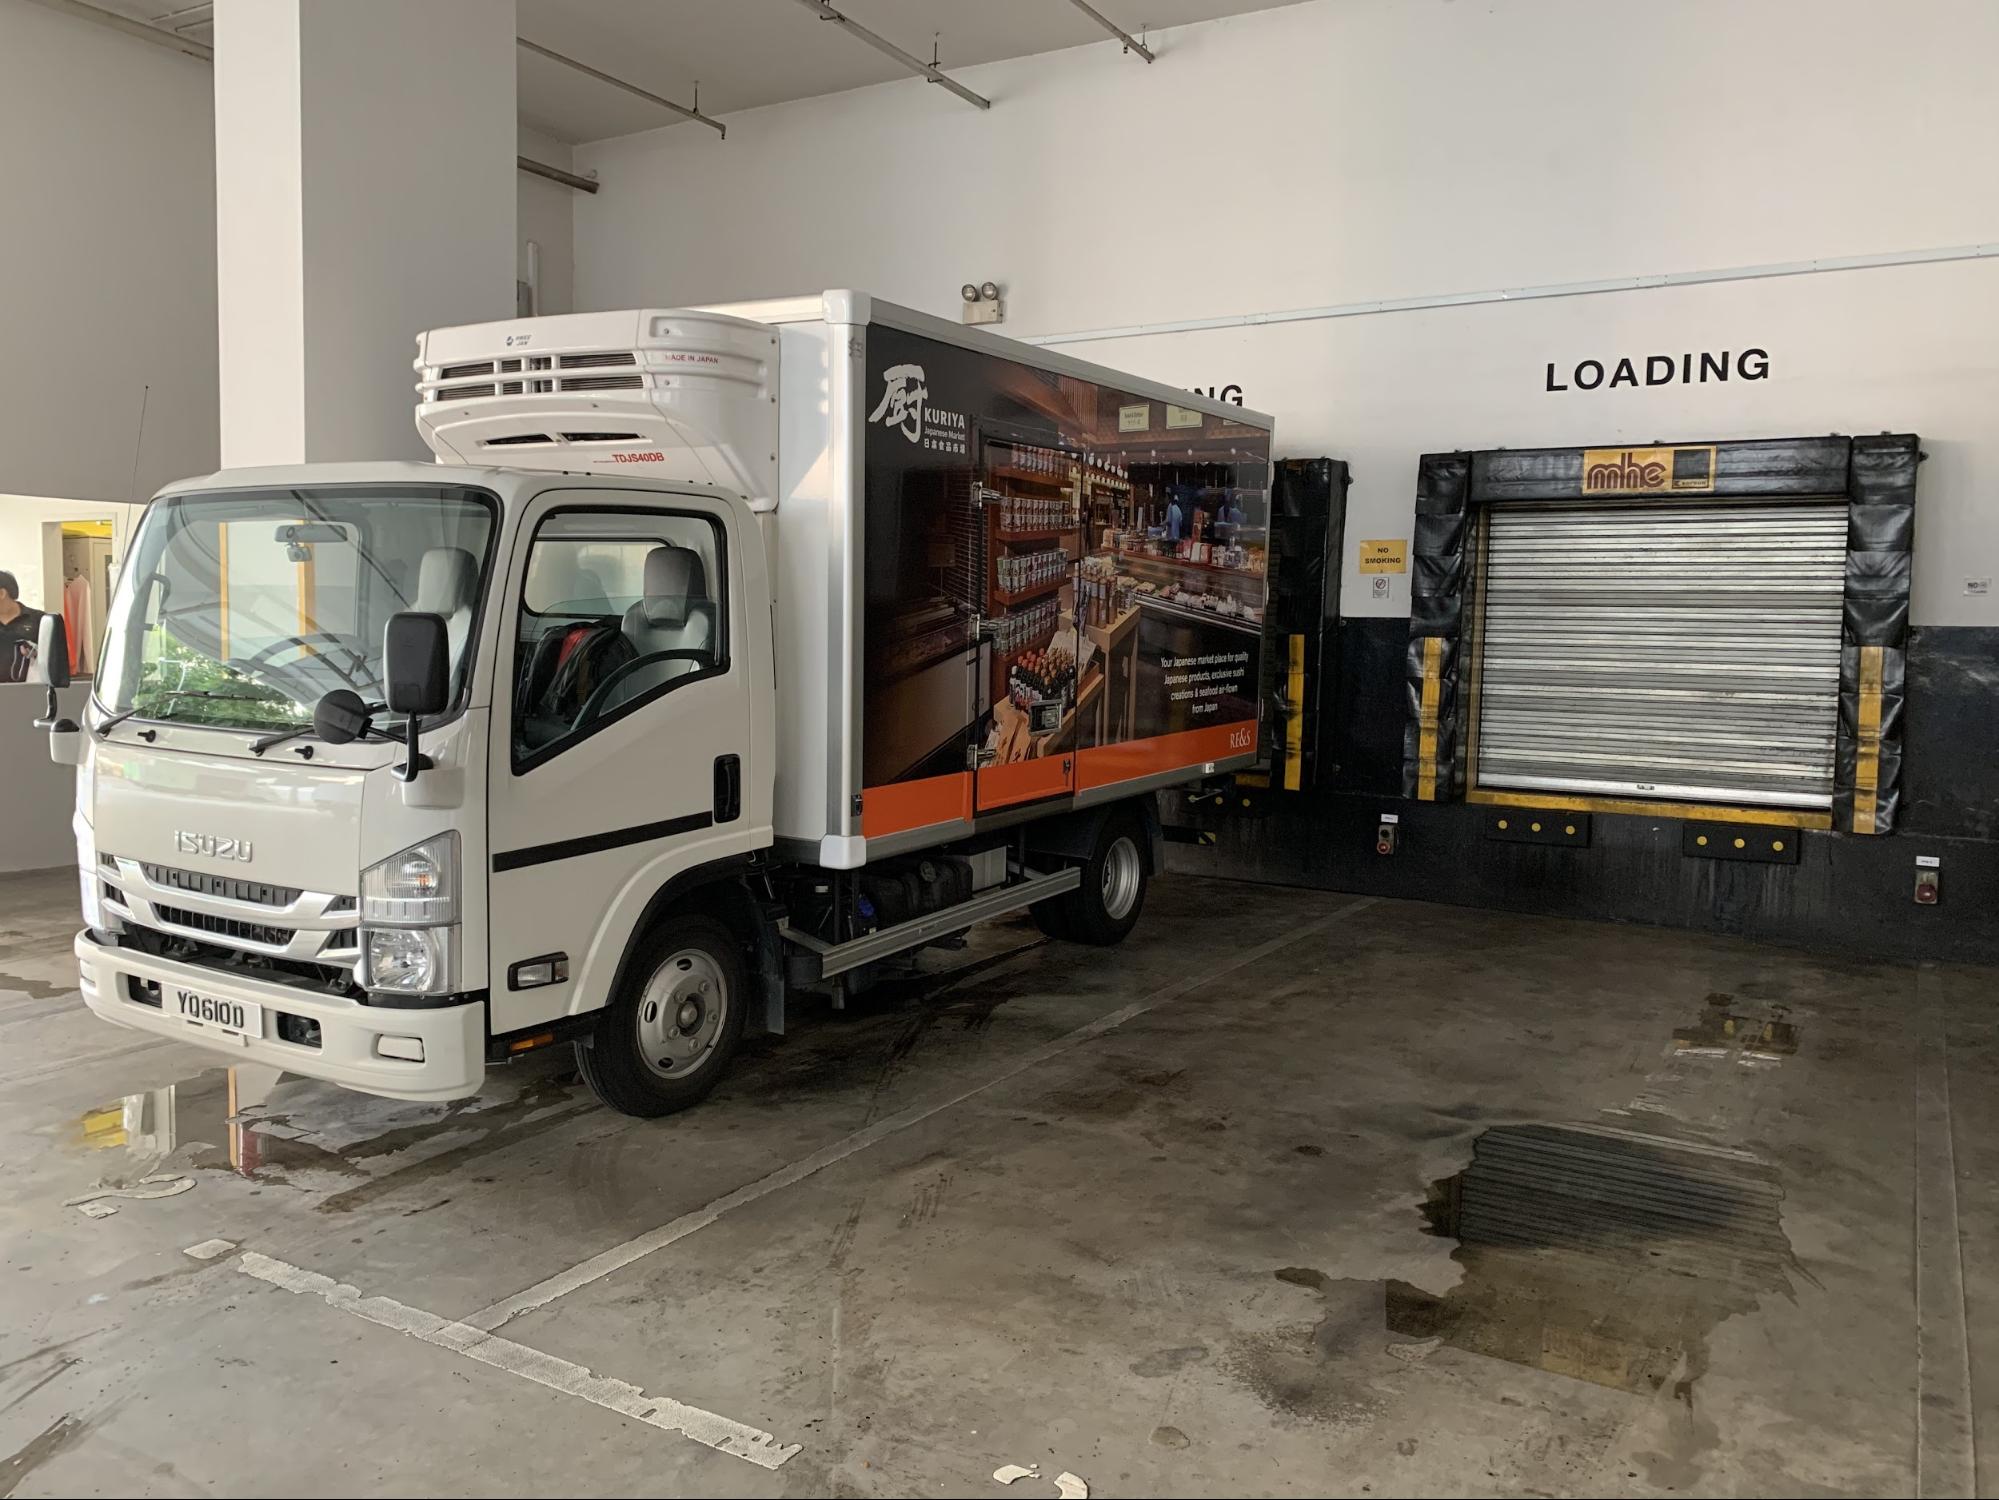 Cold Truck at loading bay